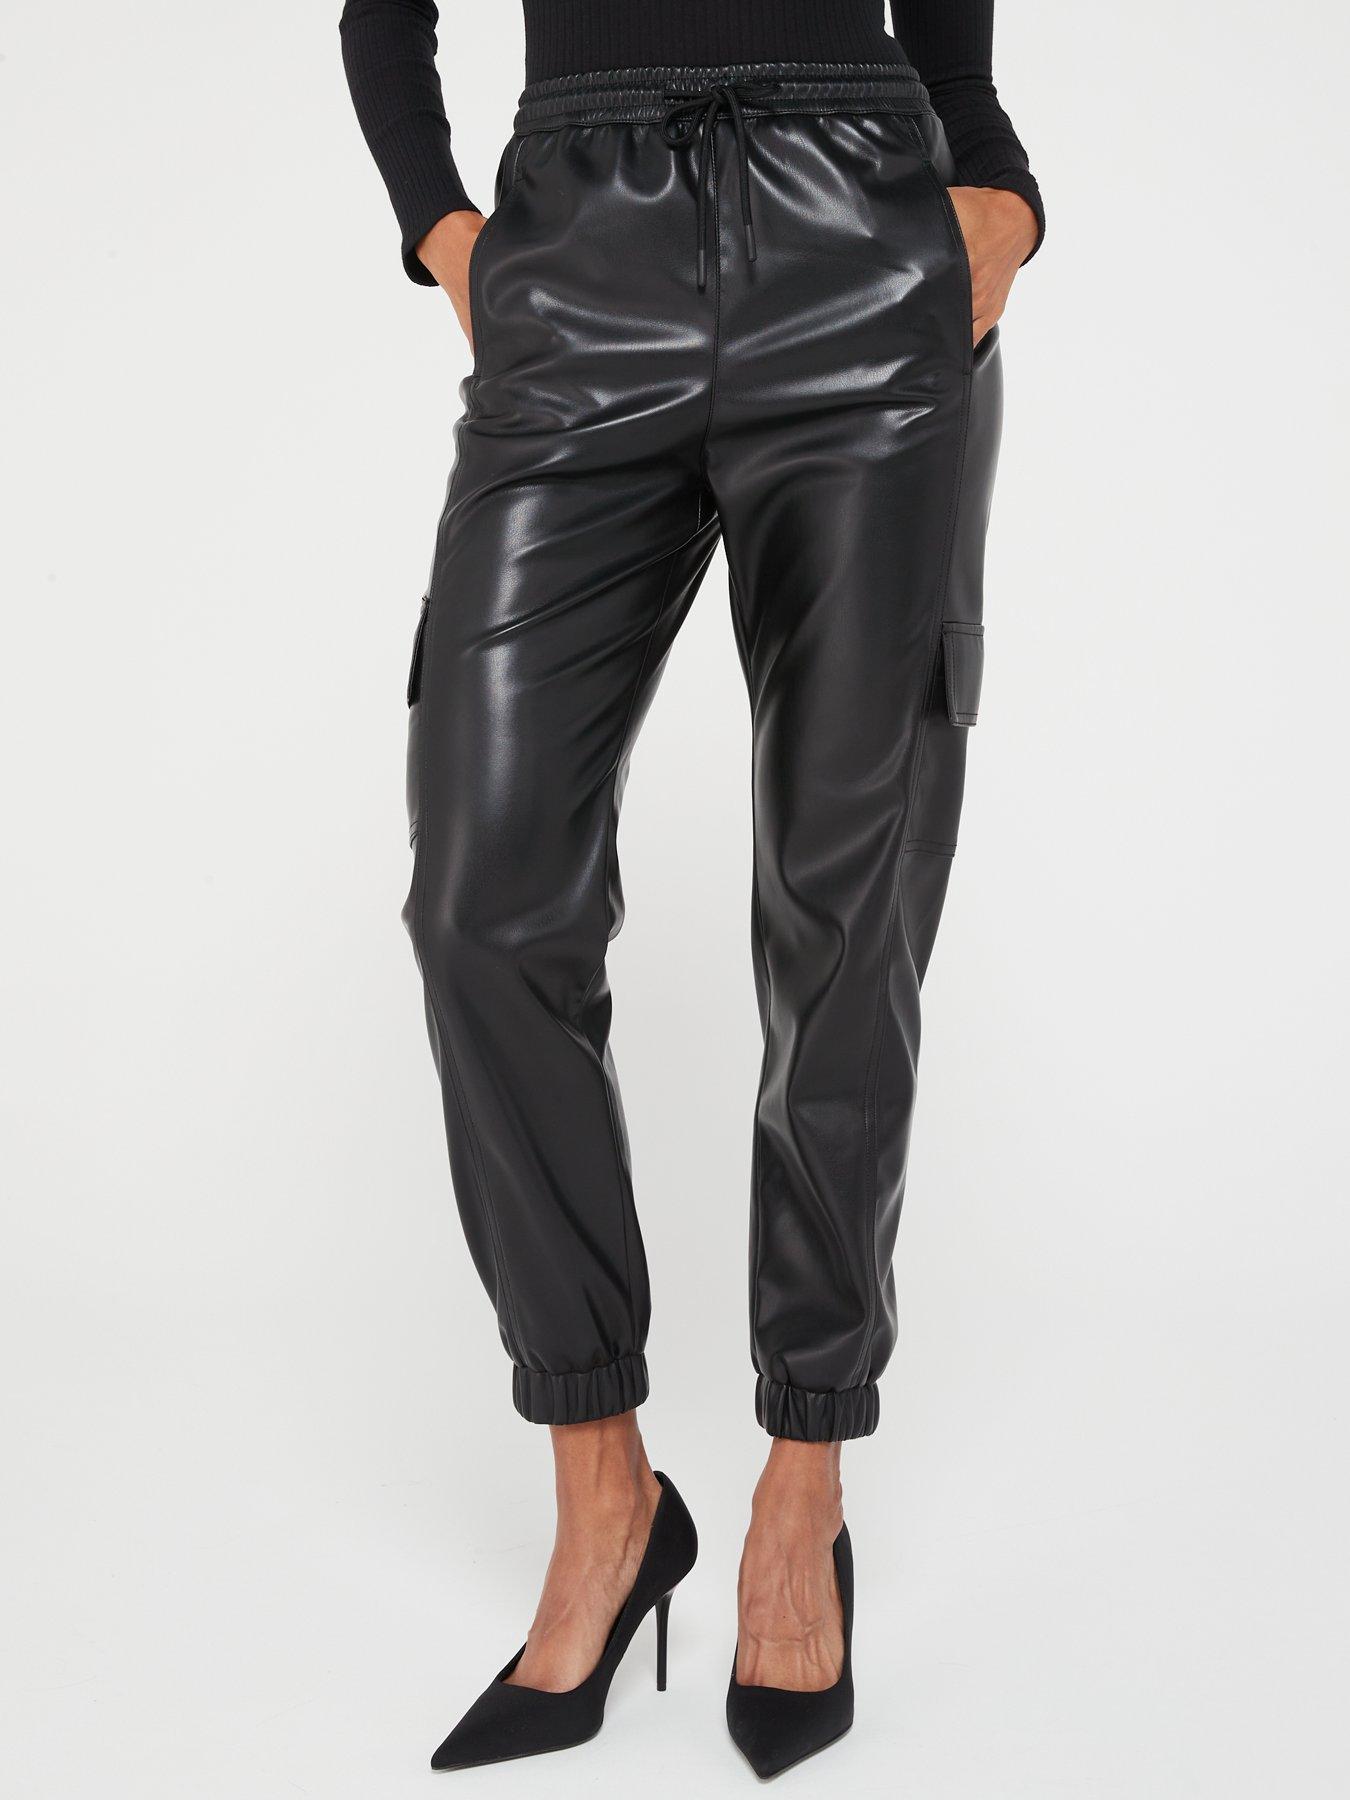 Woman Elegant Black Faux Leather Leggings High Stand Size L/XL Tied At Front